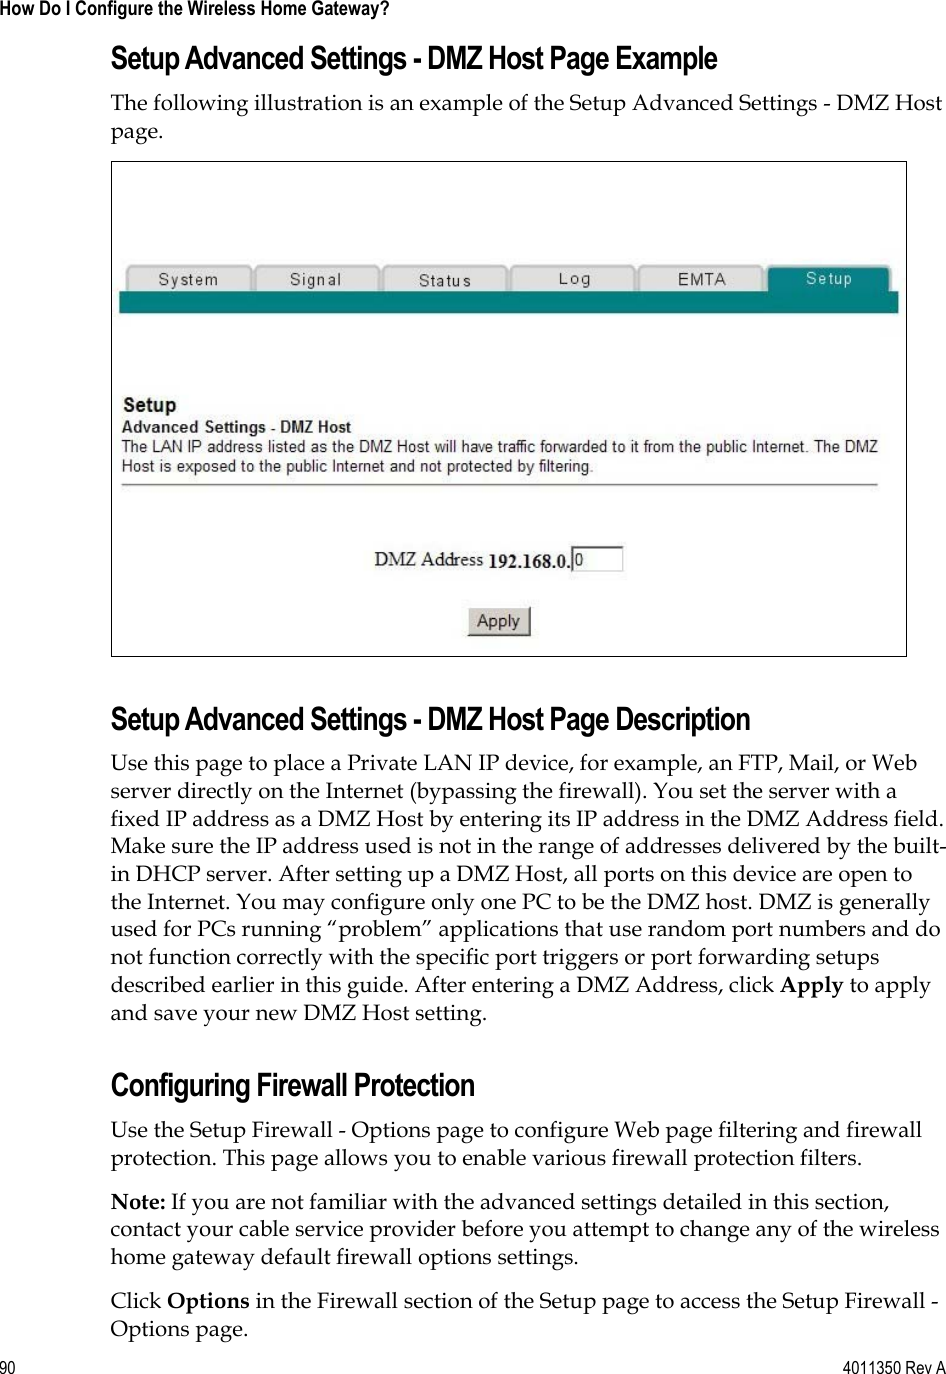 90    4011350 Rev A How Do I Configure the Wireless Home Gateway? Setup Advanced Settings - DMZ Host Page Example The following illustration is an example of the Setup Advanced Settings - DMZ Host page.Setup Advanced Settings - DMZ Host Page Description Use this page to place a Private LAN IP device, for example, an FTP, Mail, or Web server directly on the Internet (bypassing the firewall). You set the server with a fixed IP address as a DMZ Host by entering its IP address in the DMZ Address field. Make sure the IP address used is not in the range of addresses delivered by the built-in DHCP server. After setting up a DMZ Host, all ports on this device are open to the Internet. You may configure only one PC to be the DMZ host. DMZ is generally used for PCs running “problem” applications that use random port numbers and do not function correctly with the specific port triggers or port forwarding setups described earlier in this guide. After entering a DMZ Address, click Apply to apply and save your new DMZ Host setting. Configuring Firewall Protection Use the Setup Firewall - Options page to configure Web page filtering and firewall protection. This page allows you to enable various firewall protection filters. Note: If you are not familiar with the advanced settings detailed in this section, contact your cable service provider before you attempt to change any of the wireless home gateway default firewall options settings. Click Options in the Firewall section of the Setup page to access the Setup Firewall - Options page. 